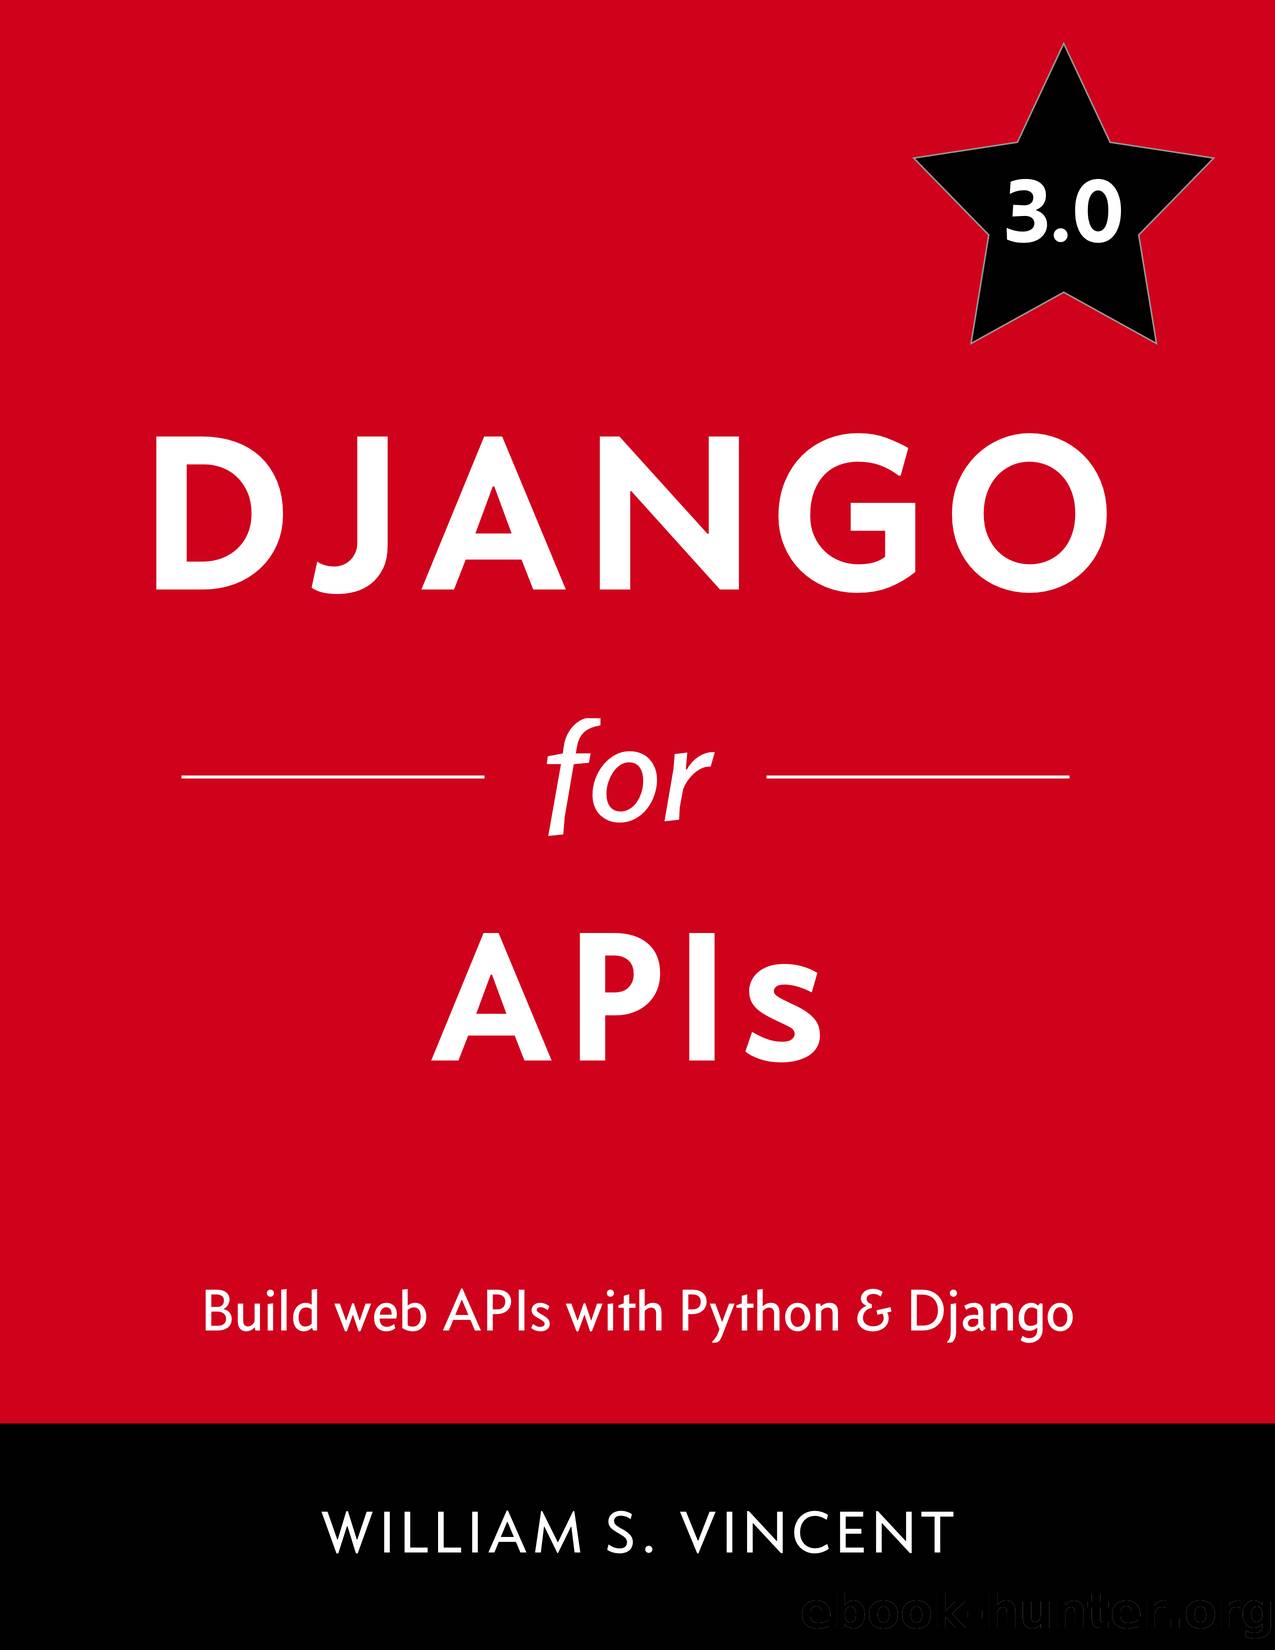 Django for APIs by William S. Vincent